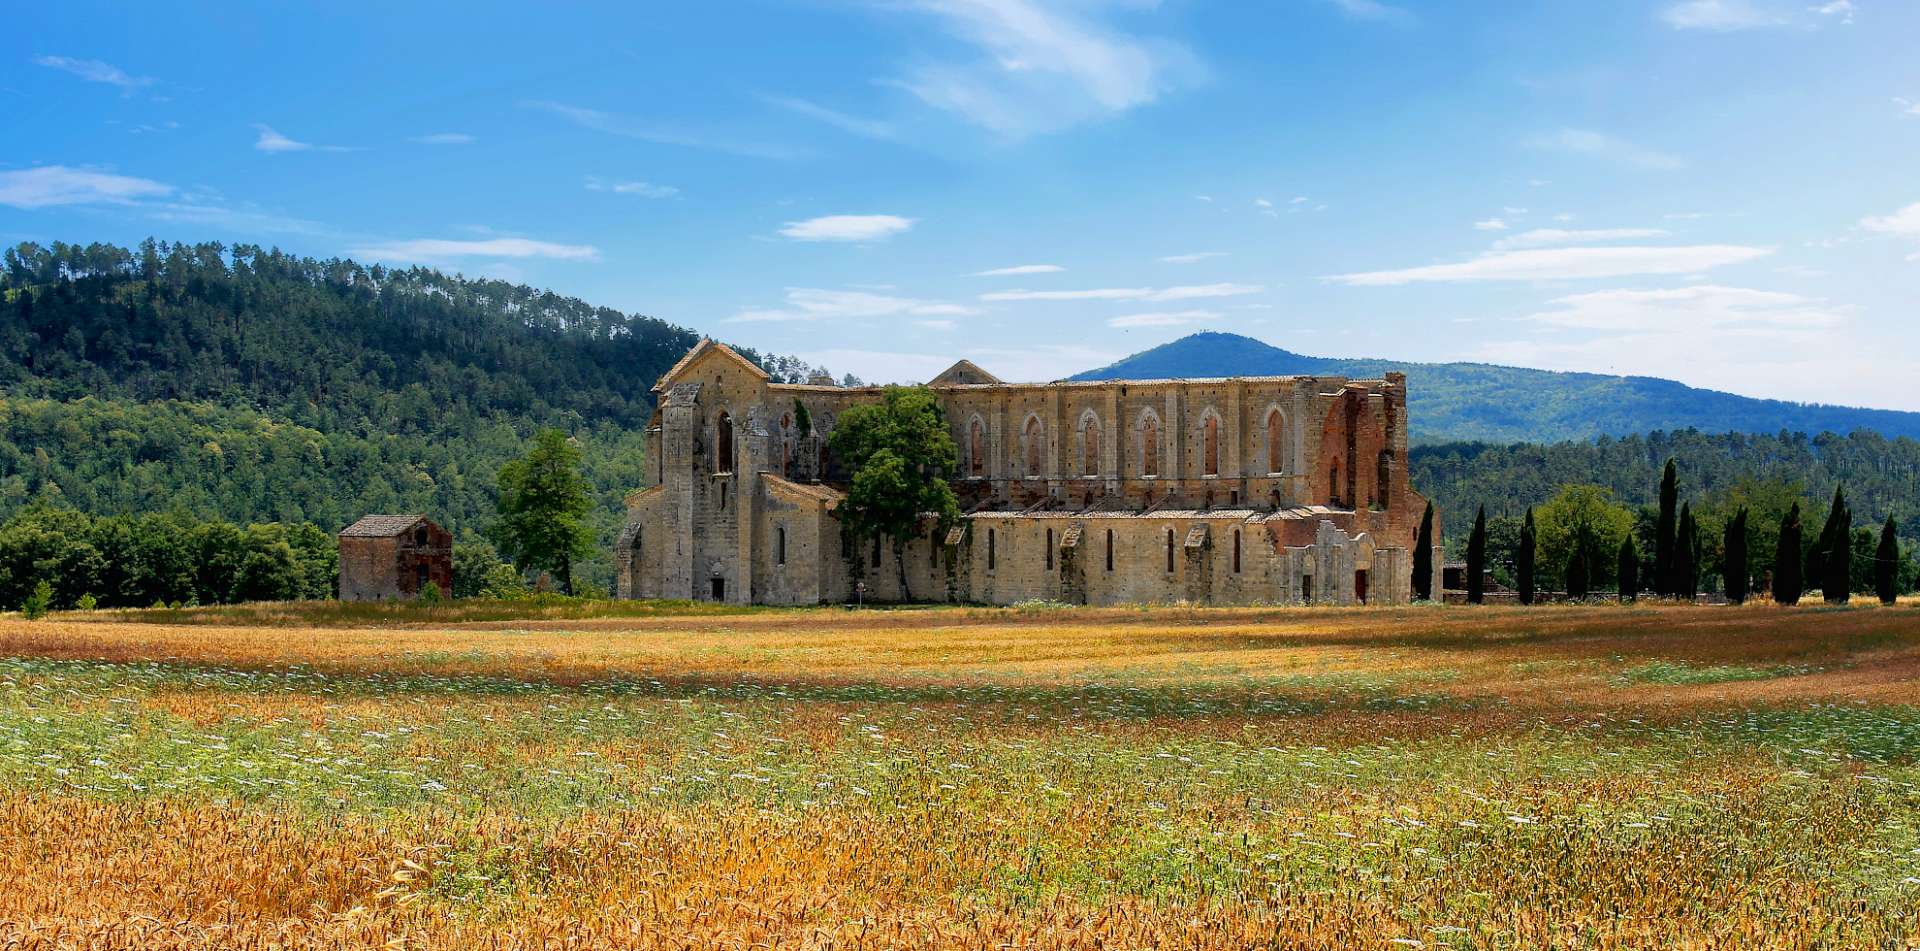 NOt only hiking but ancient Romanc churches